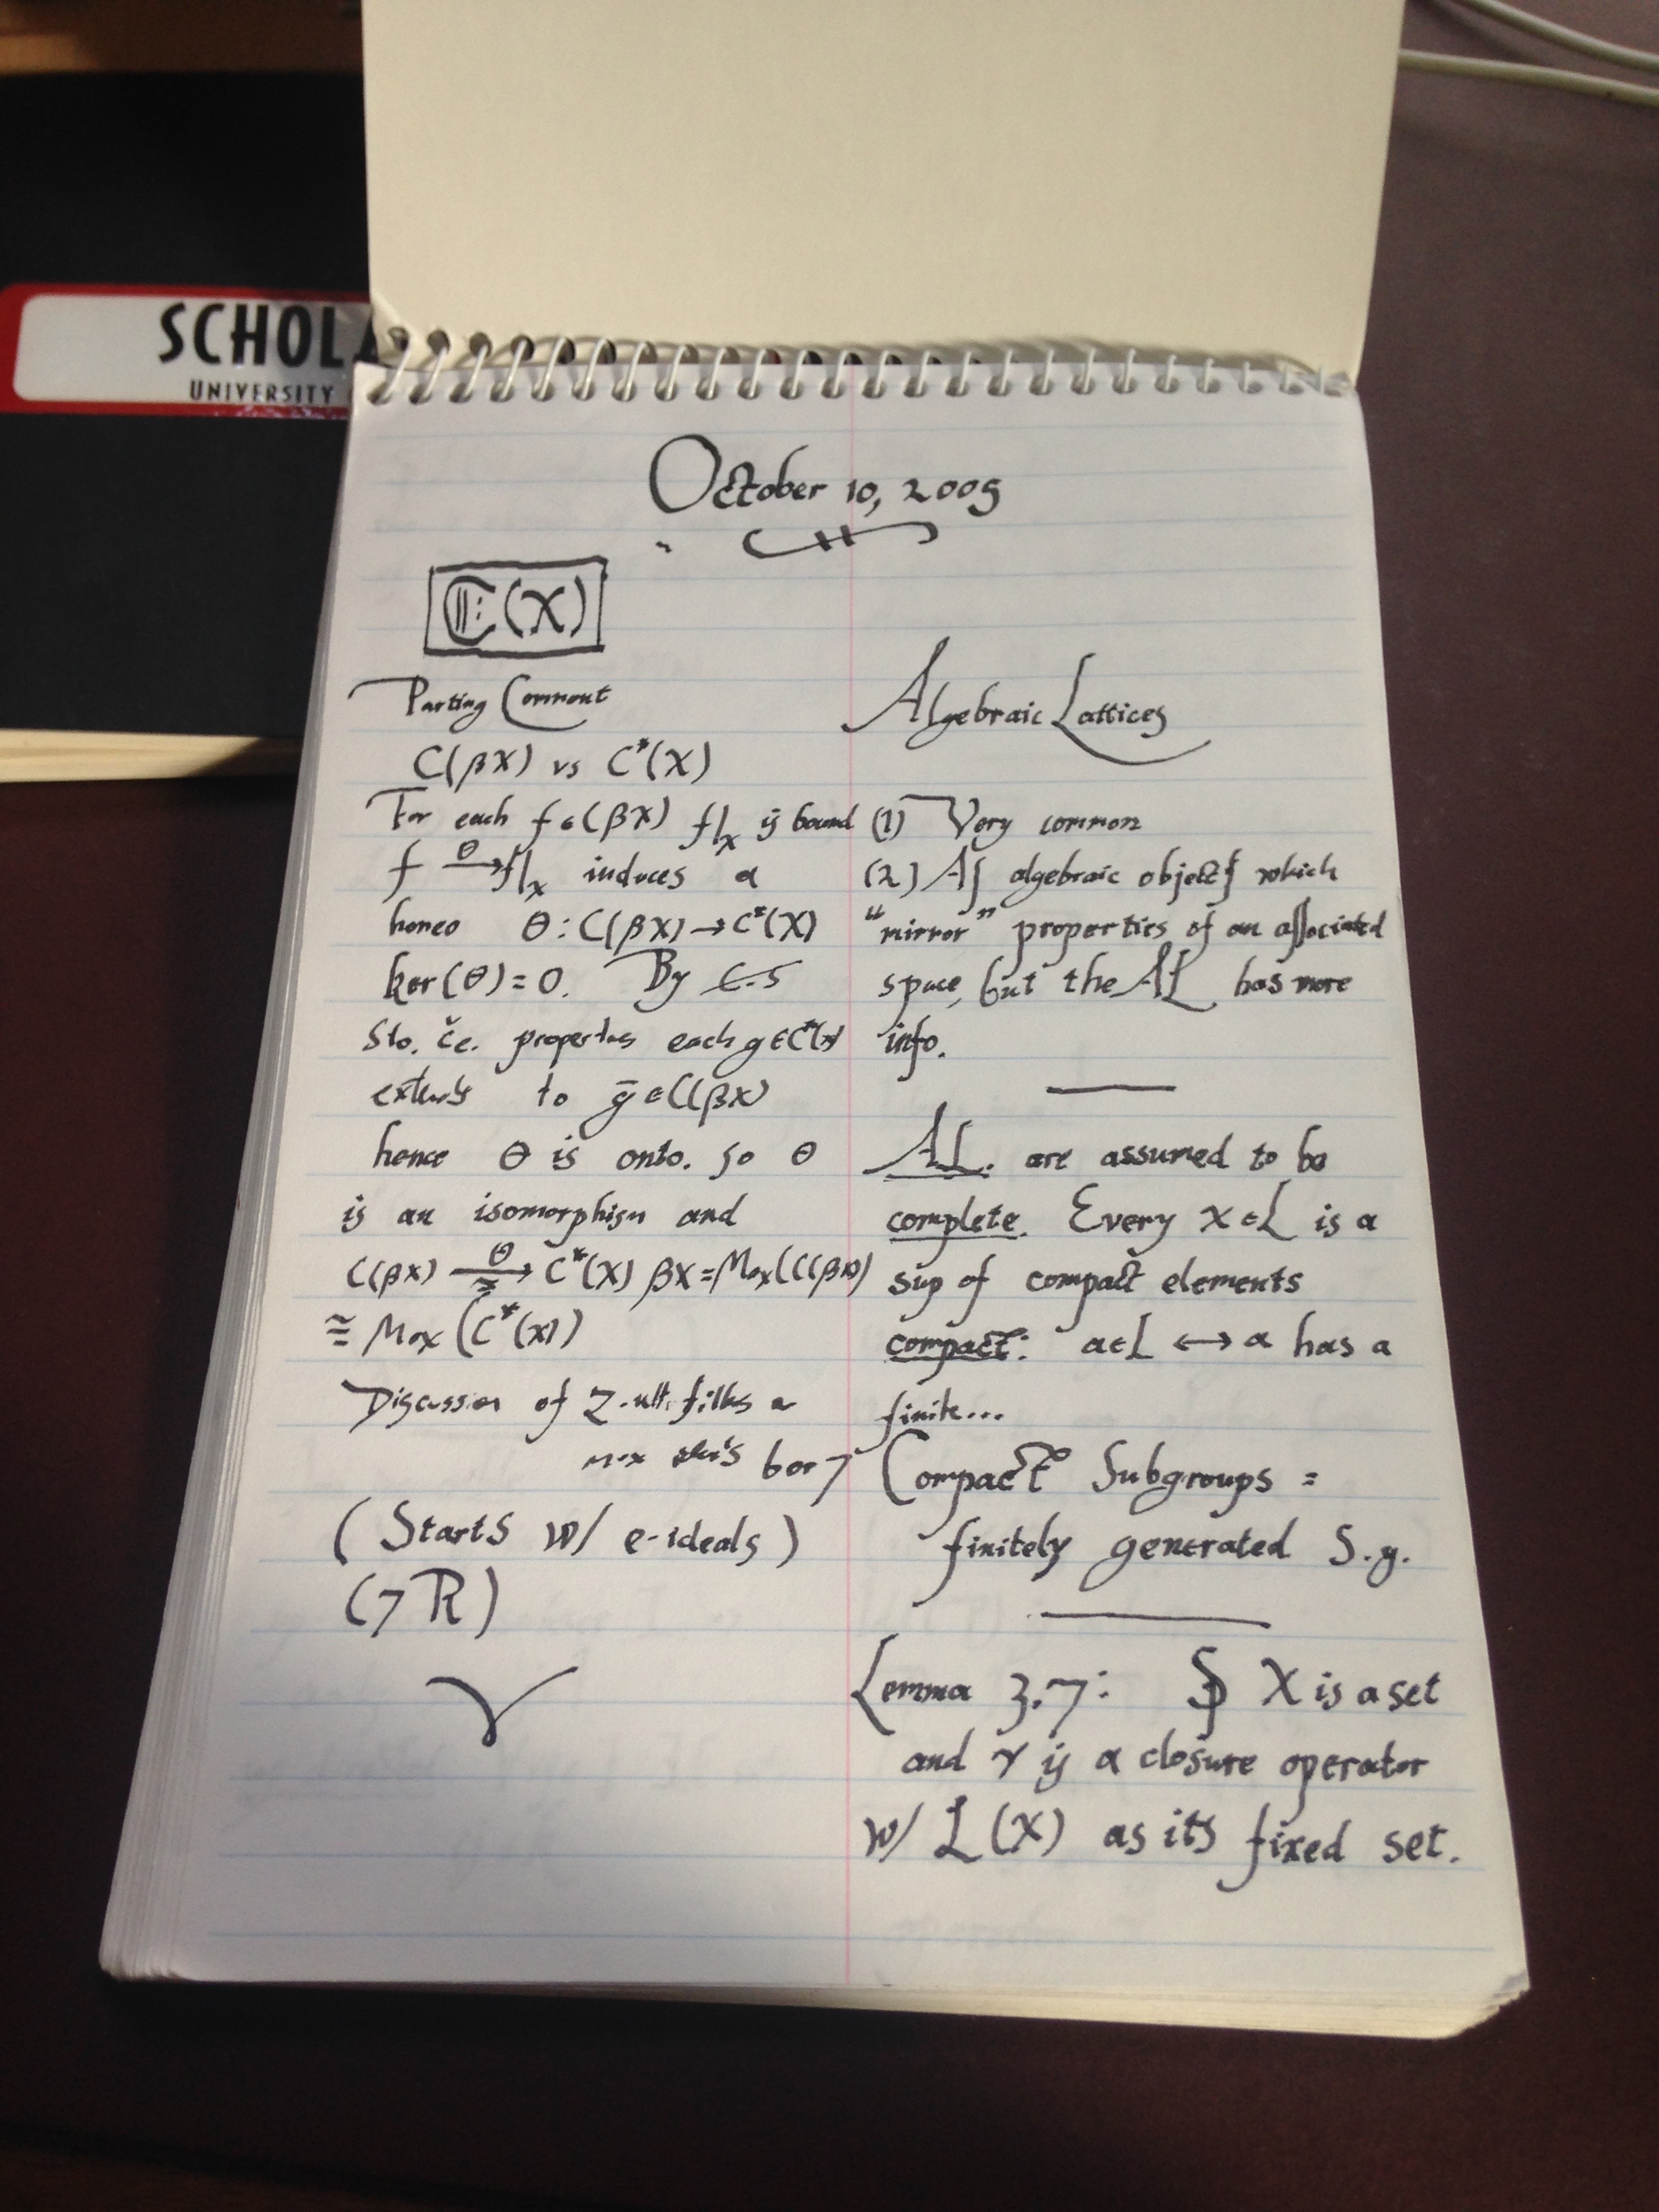 Notes from Oct 10, 2005